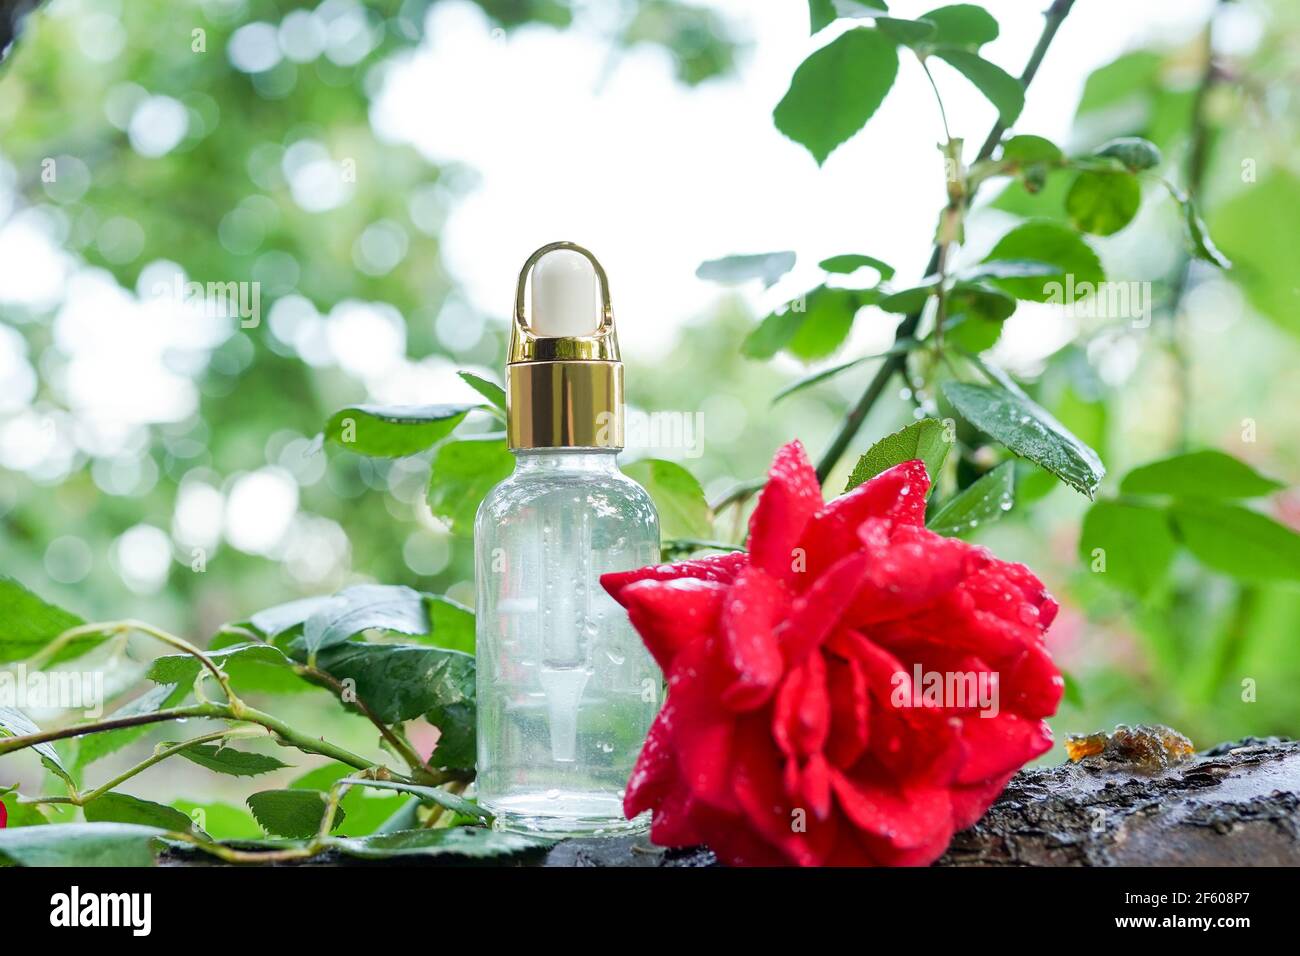 Bottles of essential oil and pink rose on the tree, green nature background, eco skin care products Stock Photo